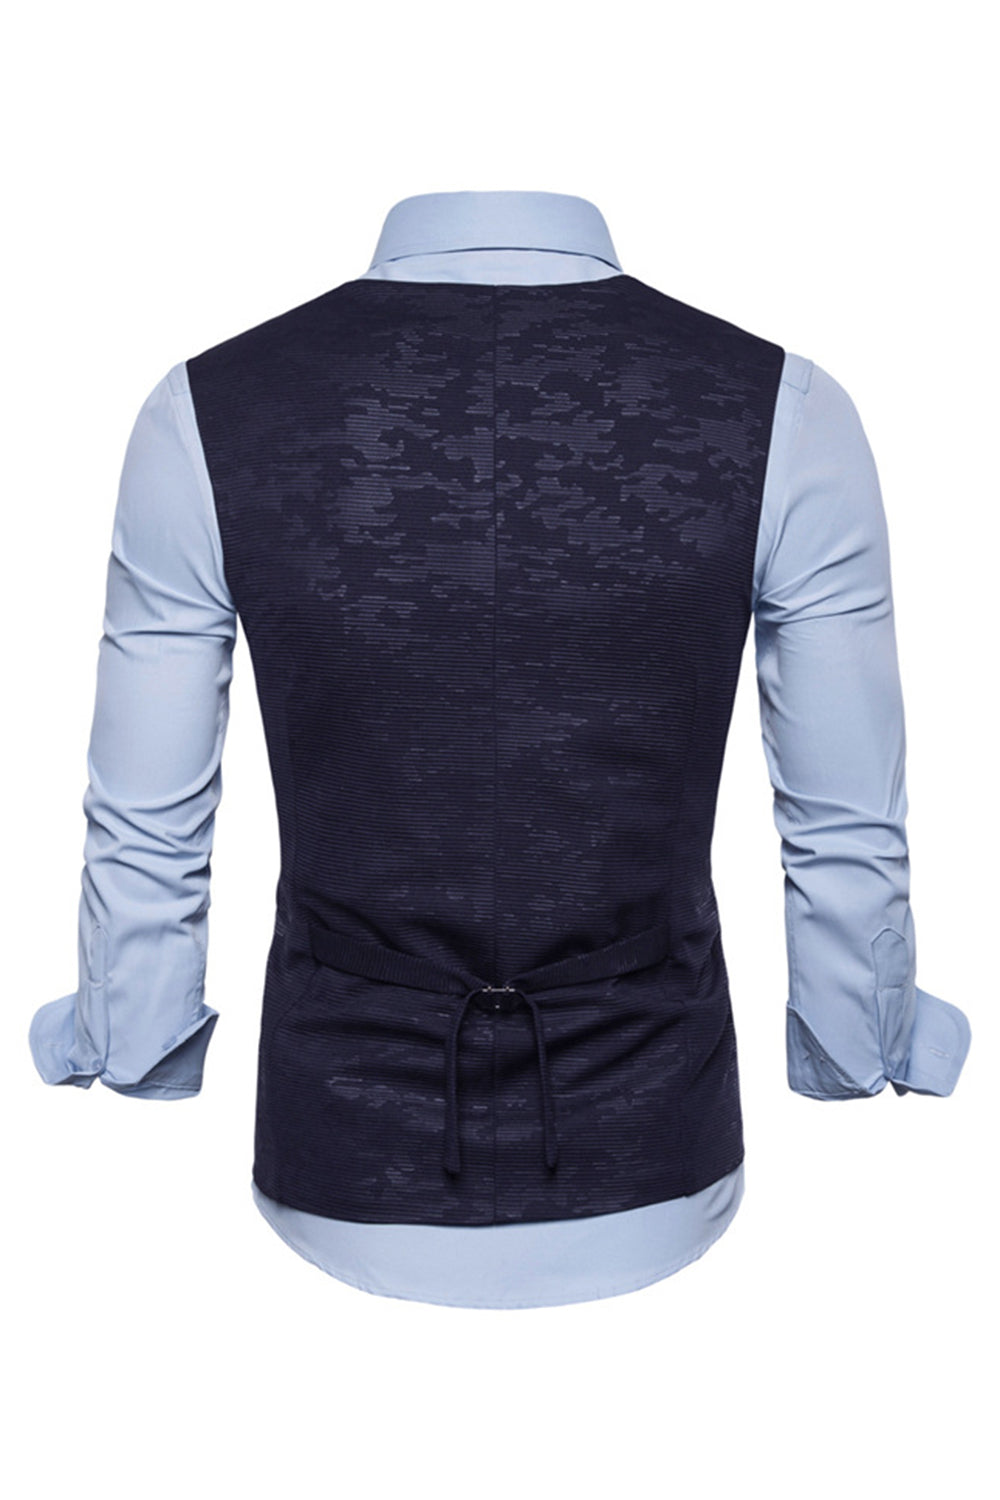 Black Double Breasted Men Vest with Shirt Accessories Set